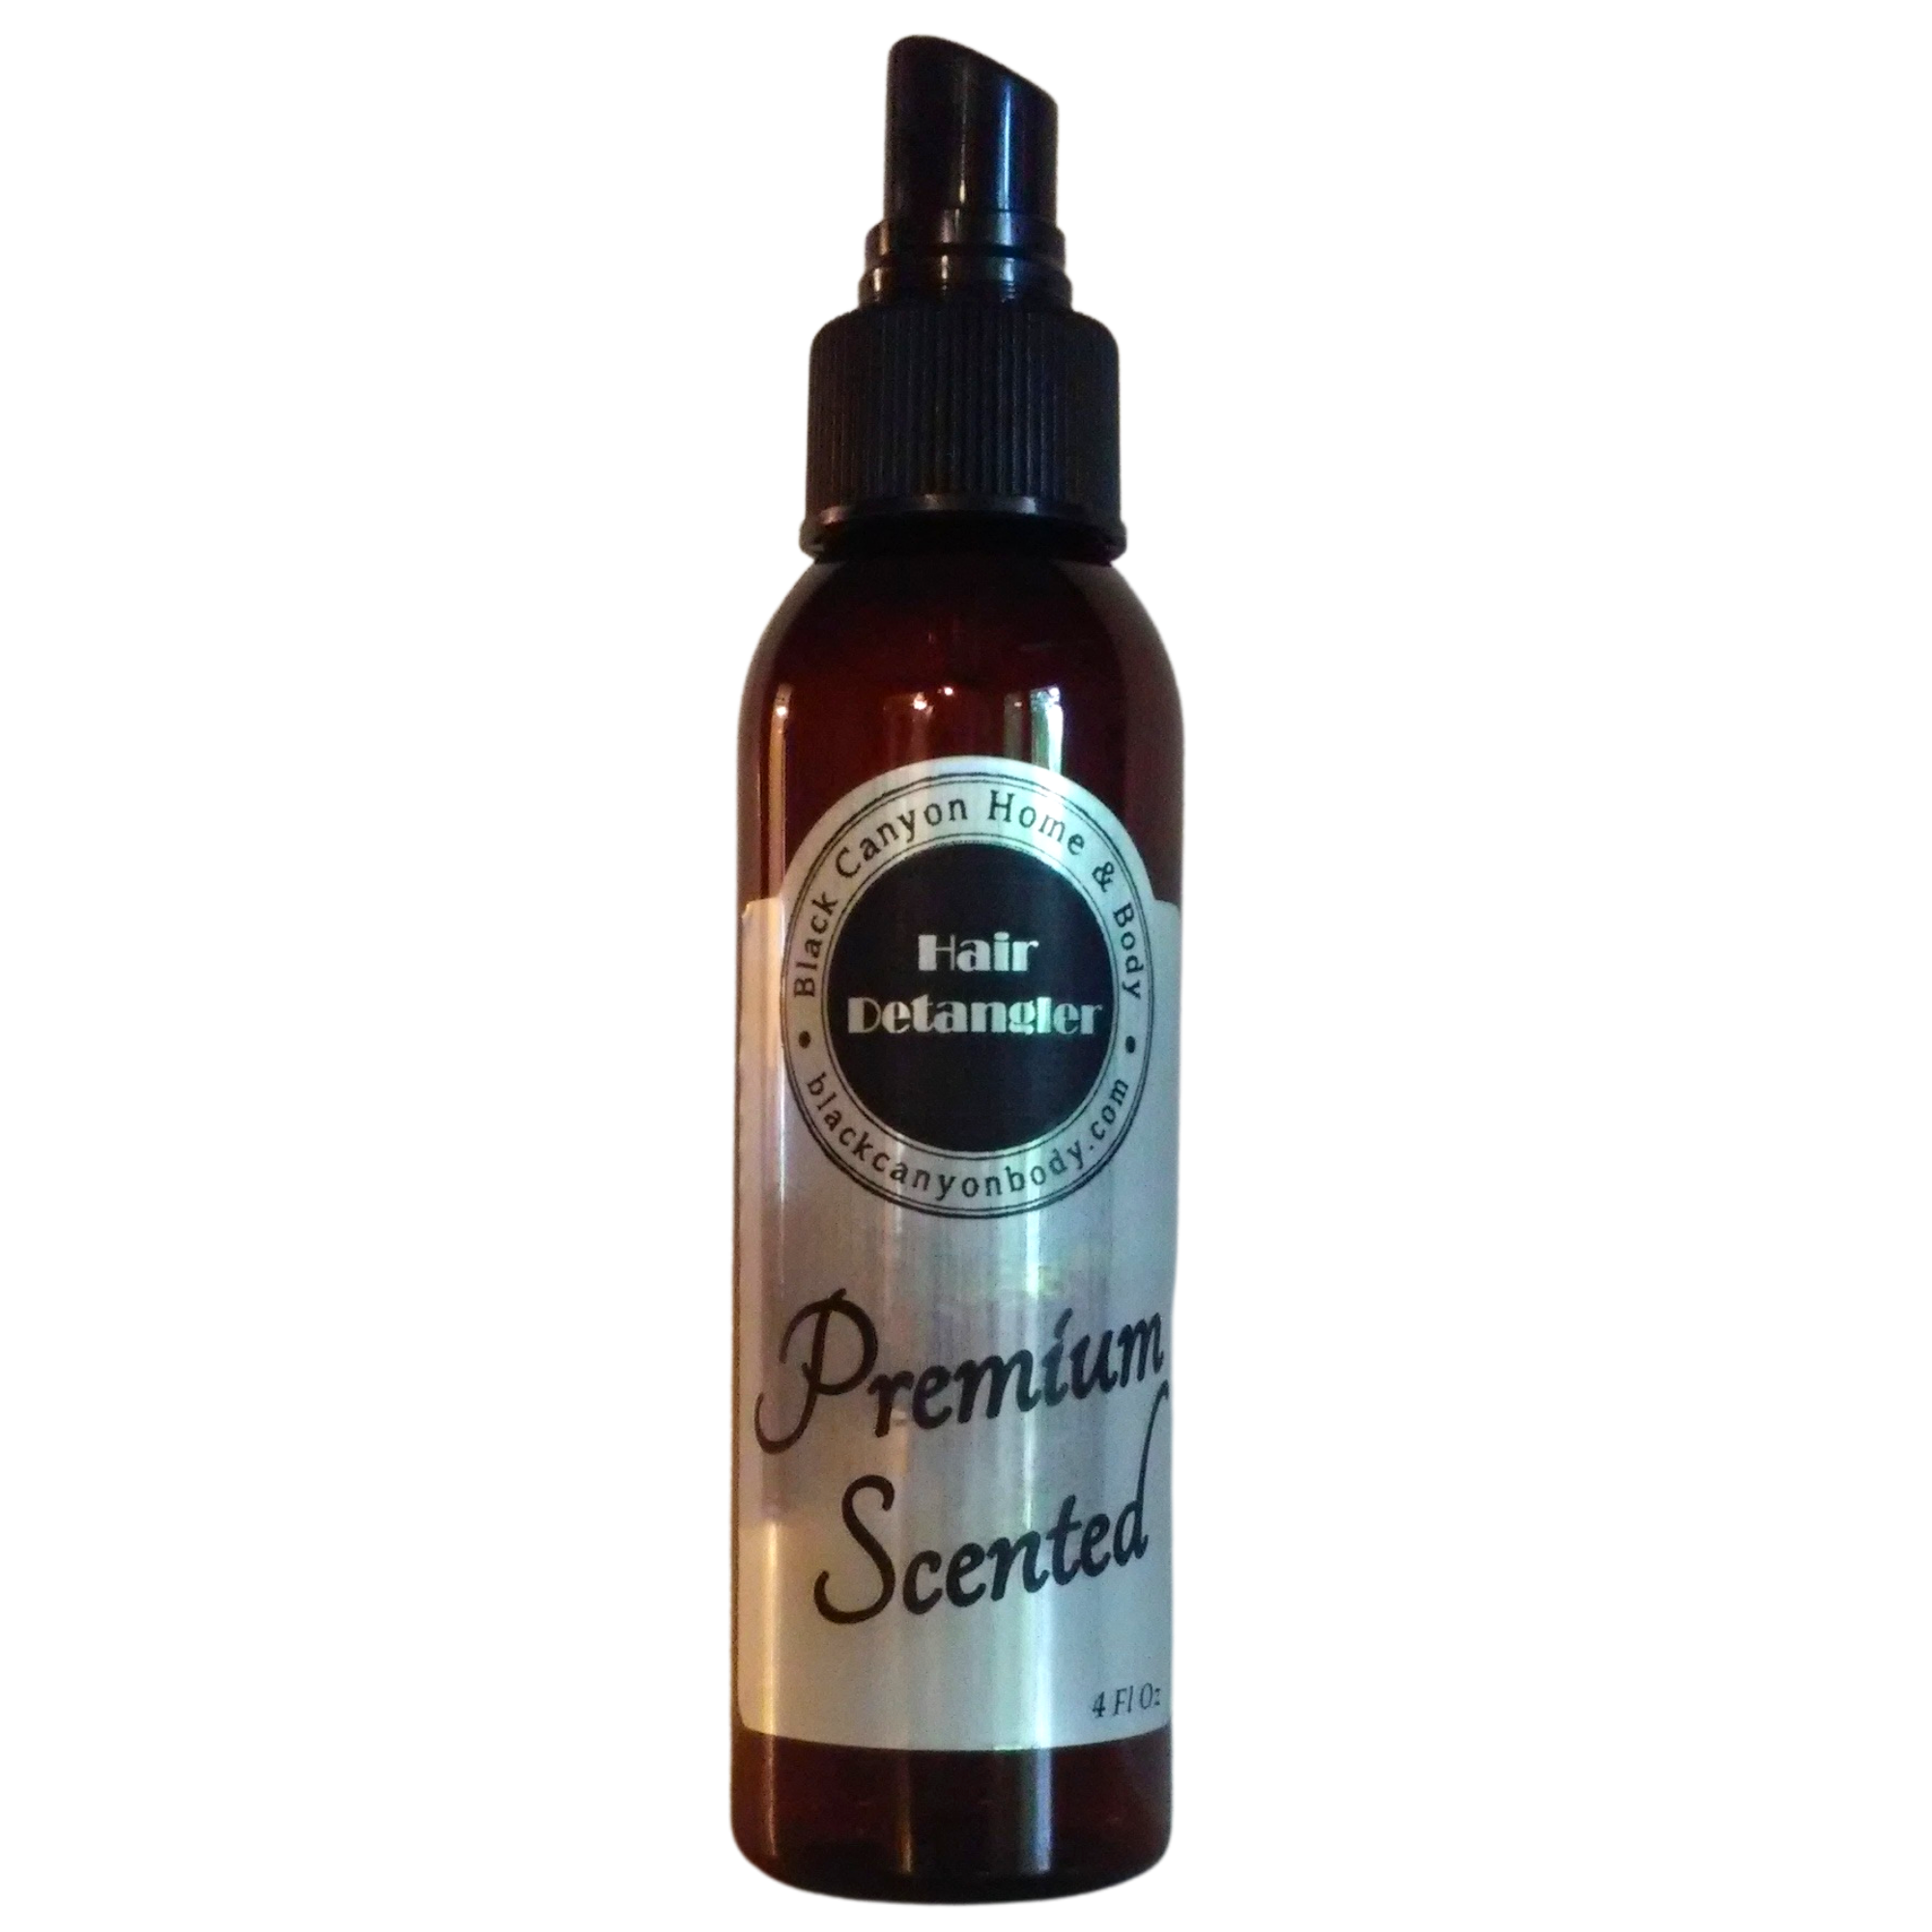 Black Canyon Cucumber Mint Scented Hair Detangler Spray with Olive Oil